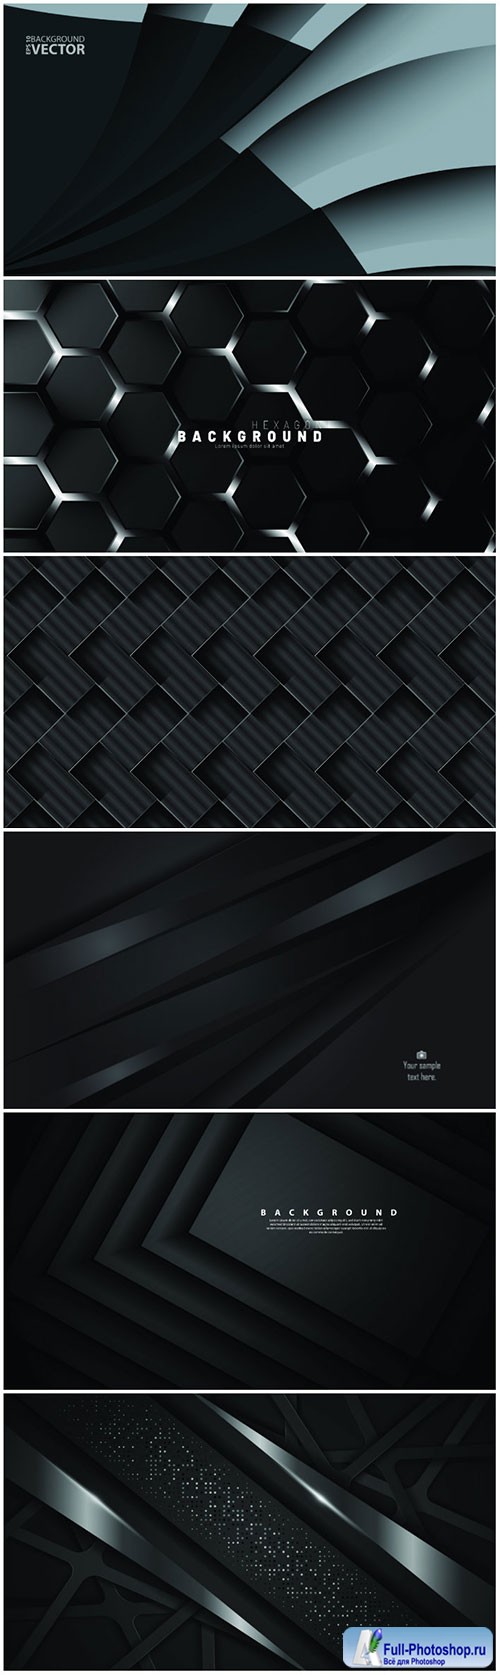 Abstract vector background with dark gray metal